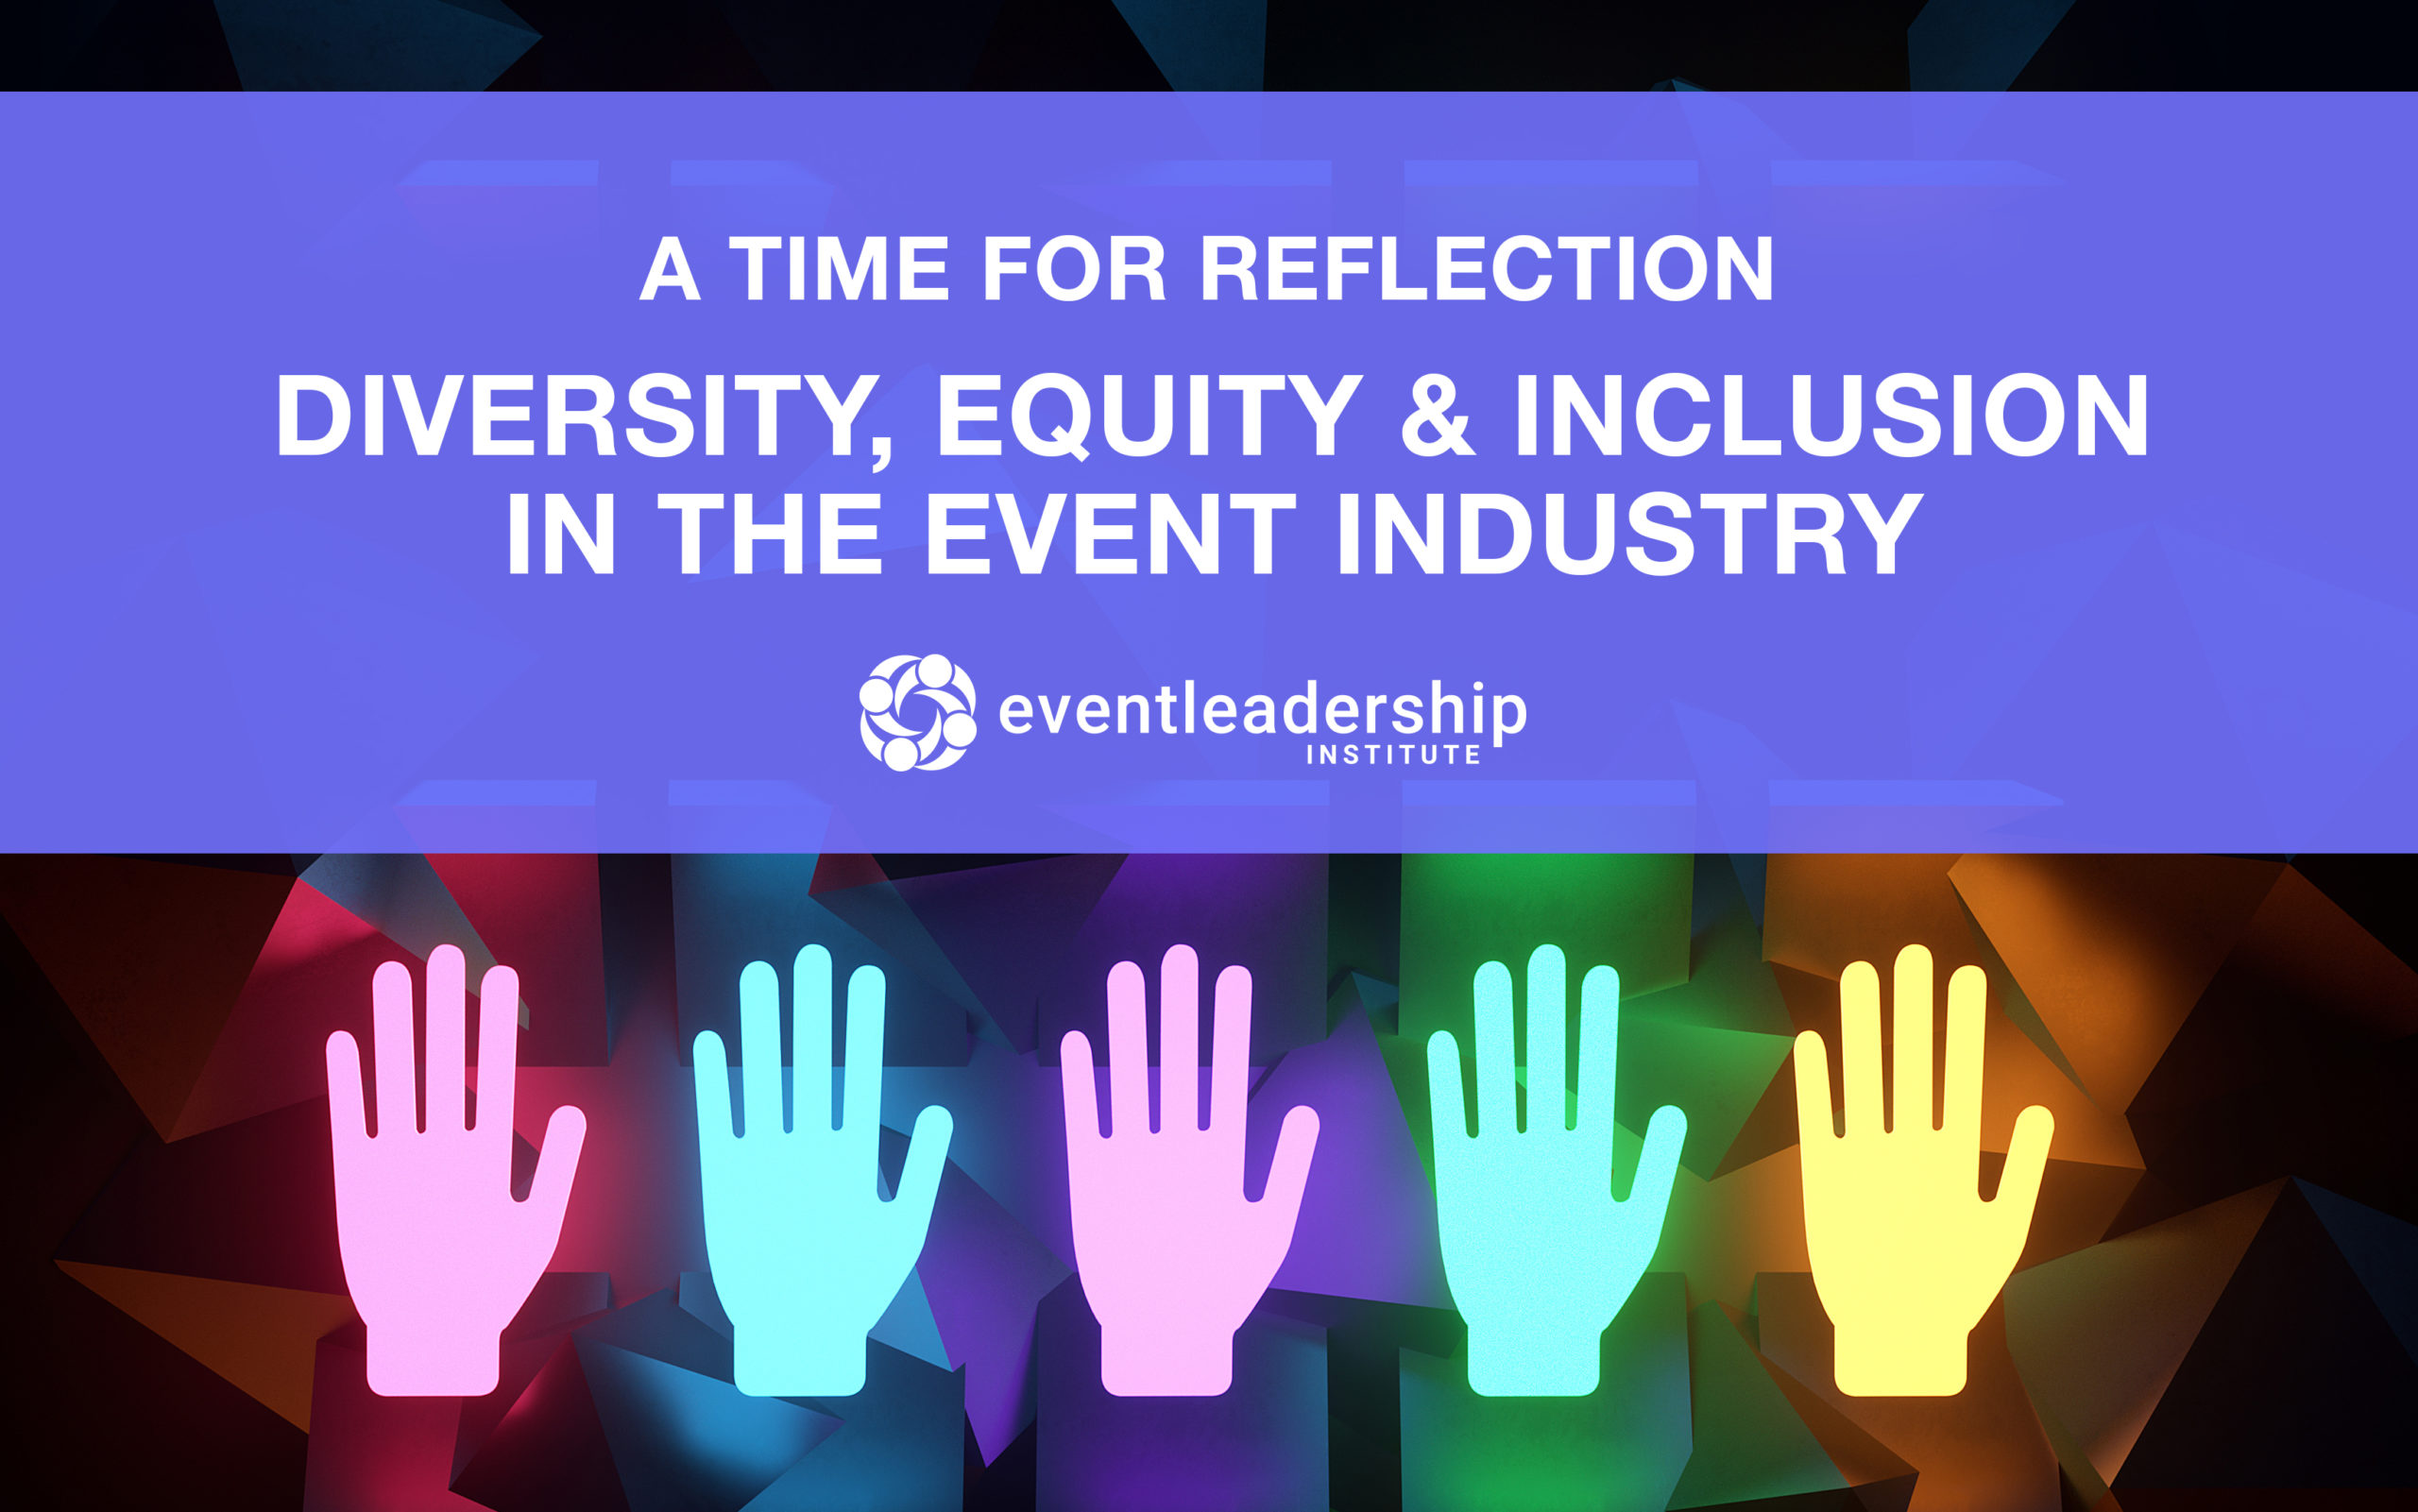 Webinar: A Time for Reflection & Change: Diversity, Equity & Inclusion in the Event Industry (Recorded February 25, 2021)